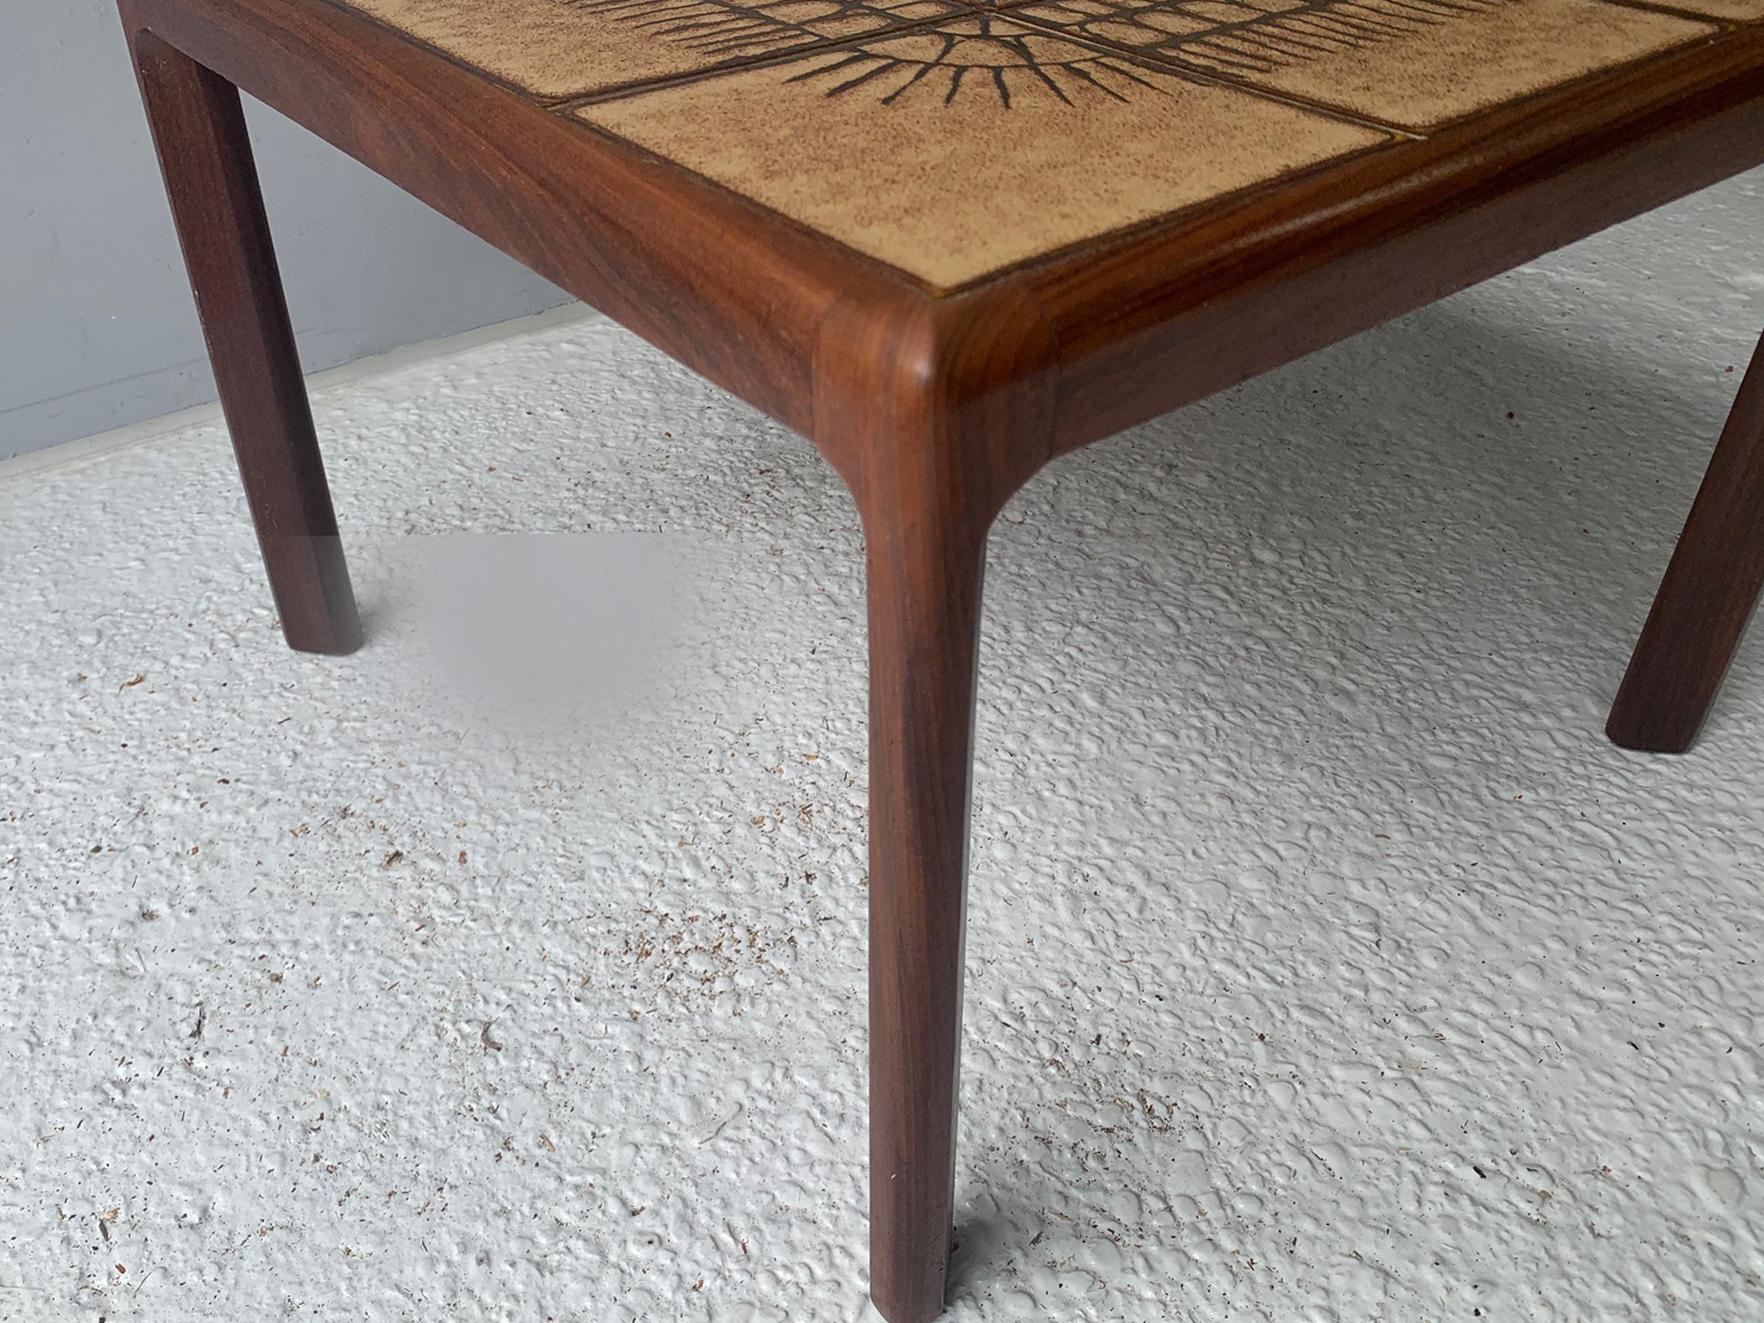 Rare 1960s G Plan Midcentury Tiled Coffee Table In Excellent Condition For Sale In London, GB